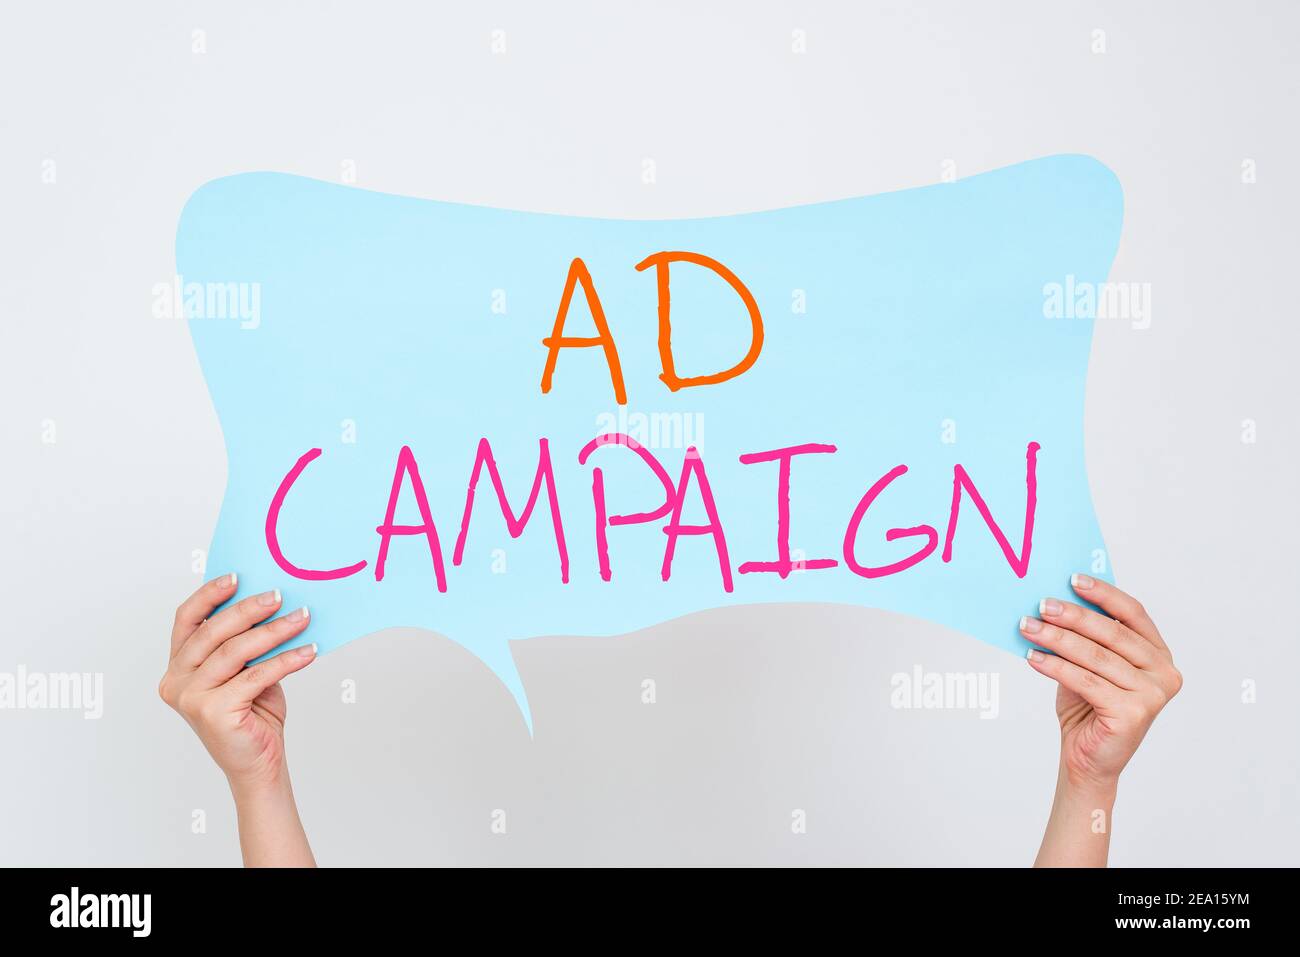 Conceptual hand writing showing Ad Campaign. Concept meaning promotion of specific product or service through internet Empty bubble chat sticker mock Stock Photo